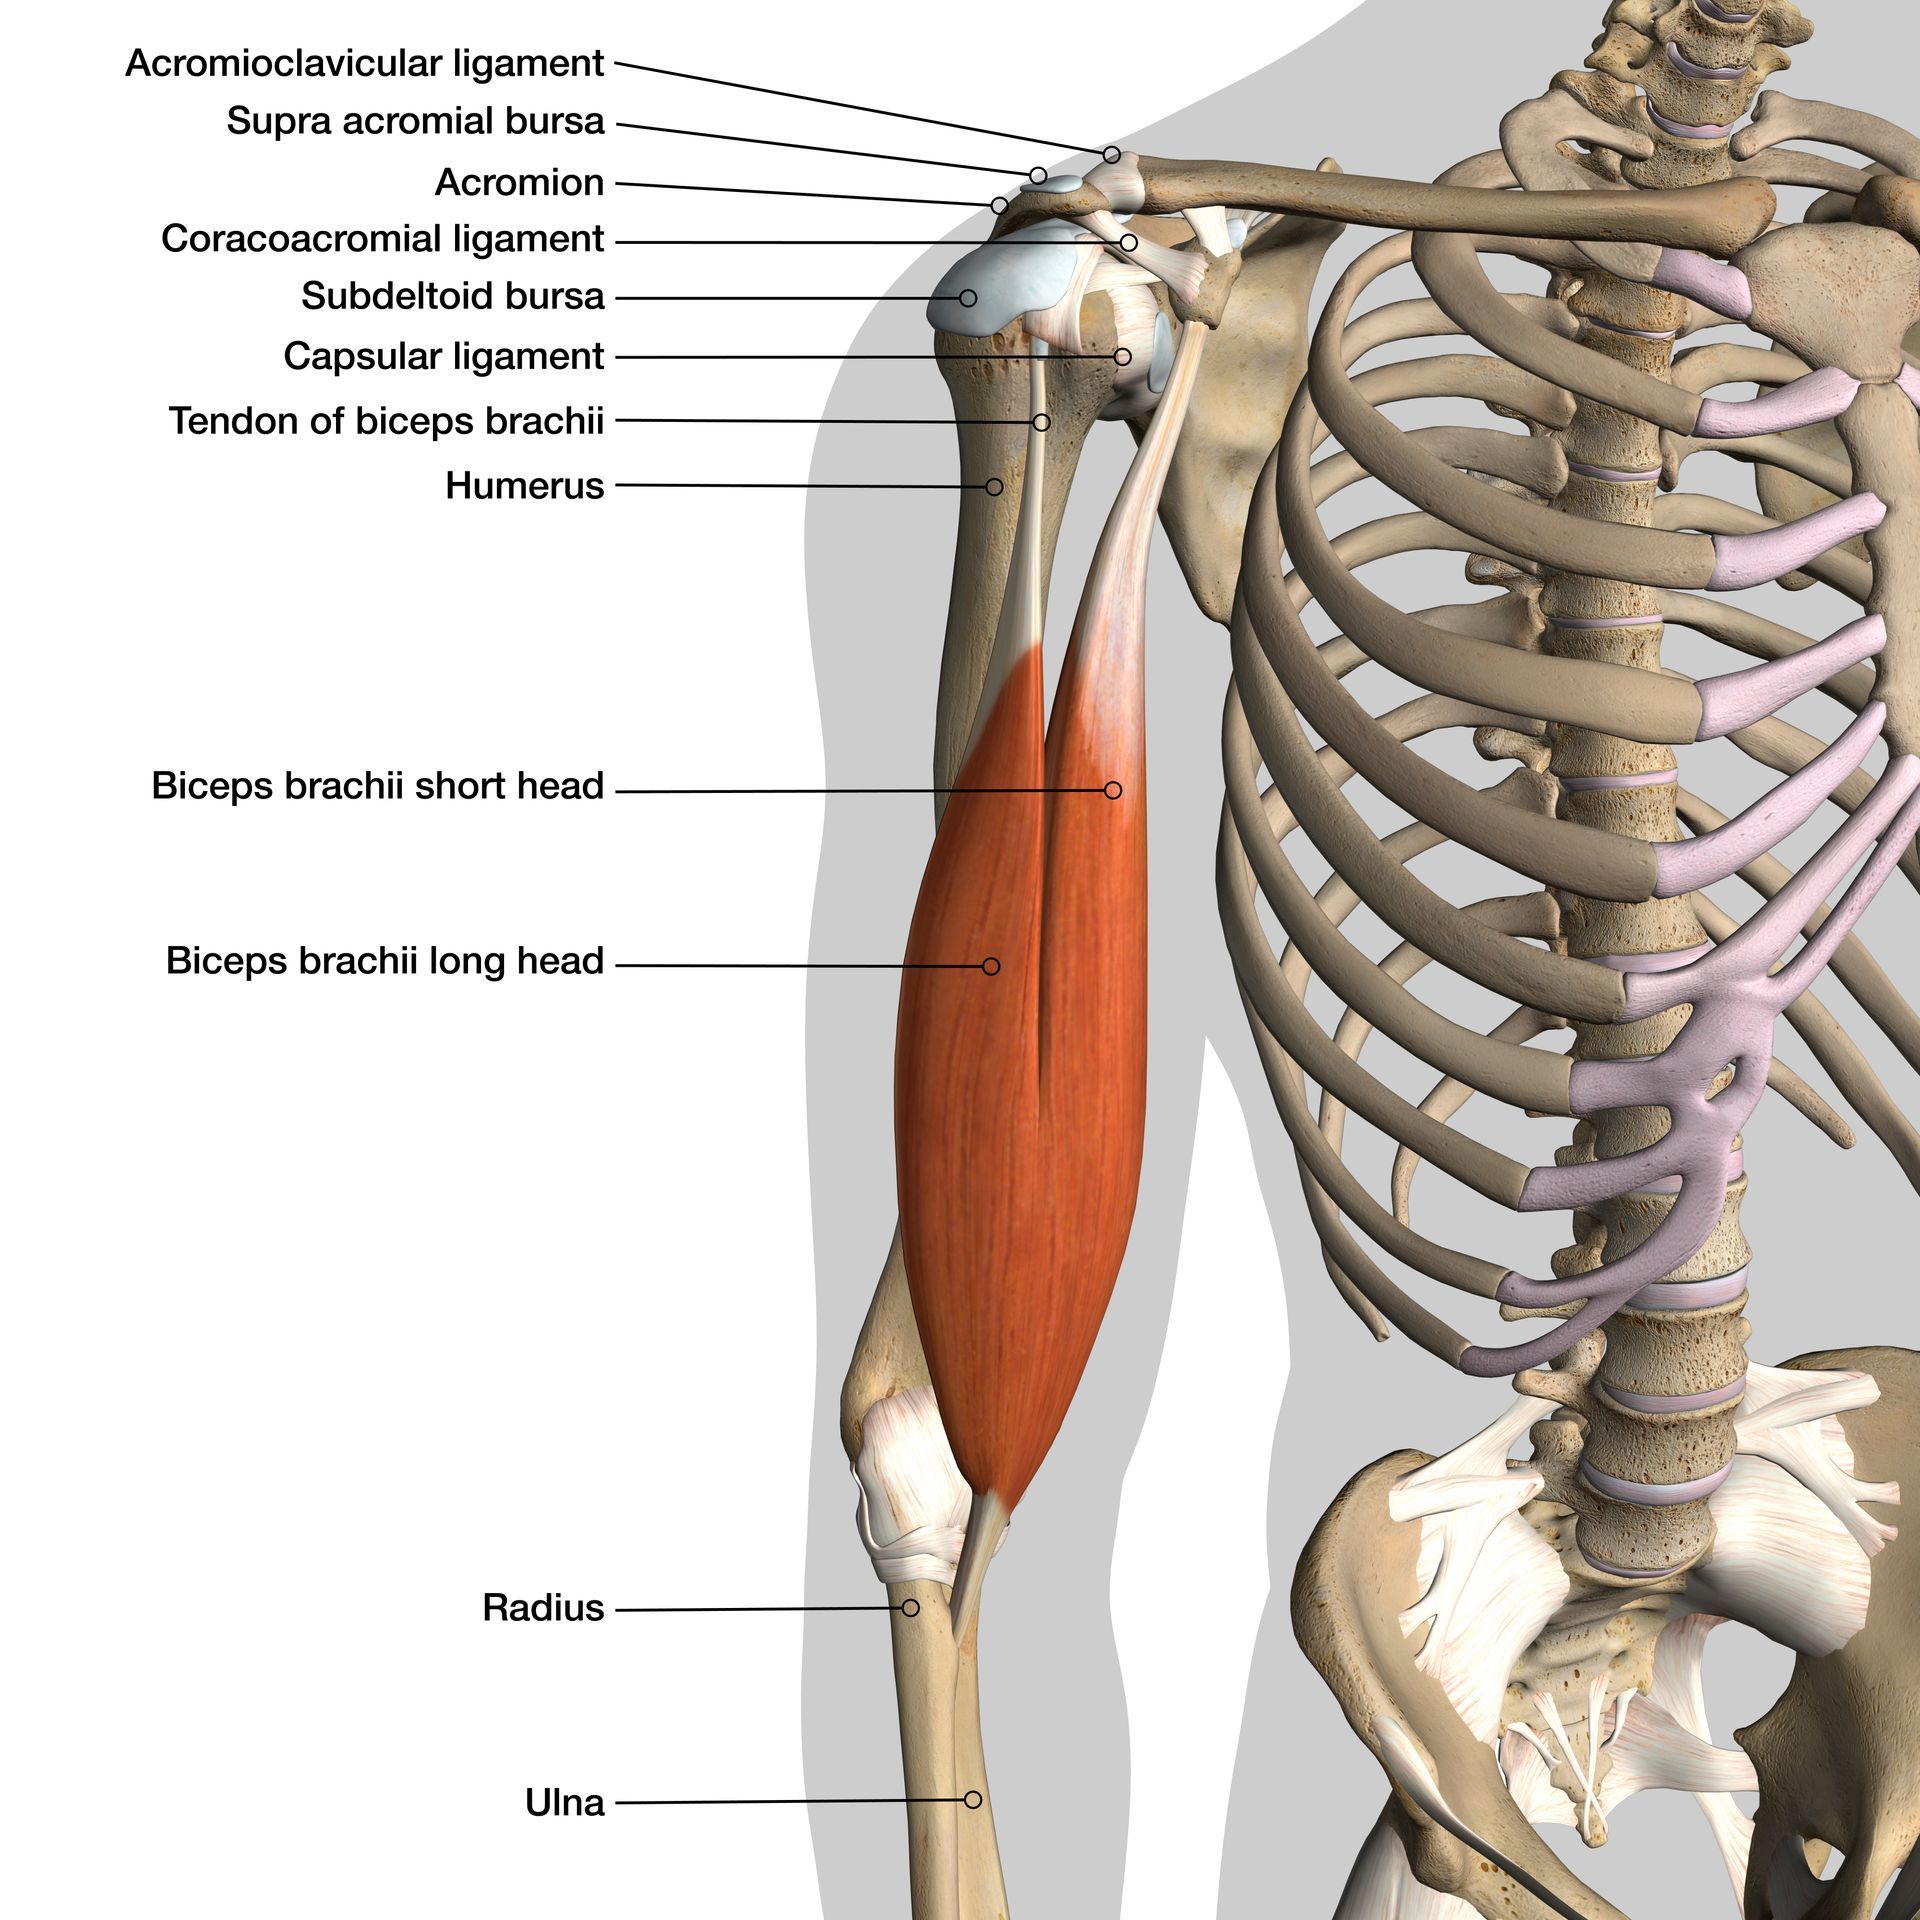 Anatomy of the biceps muscle